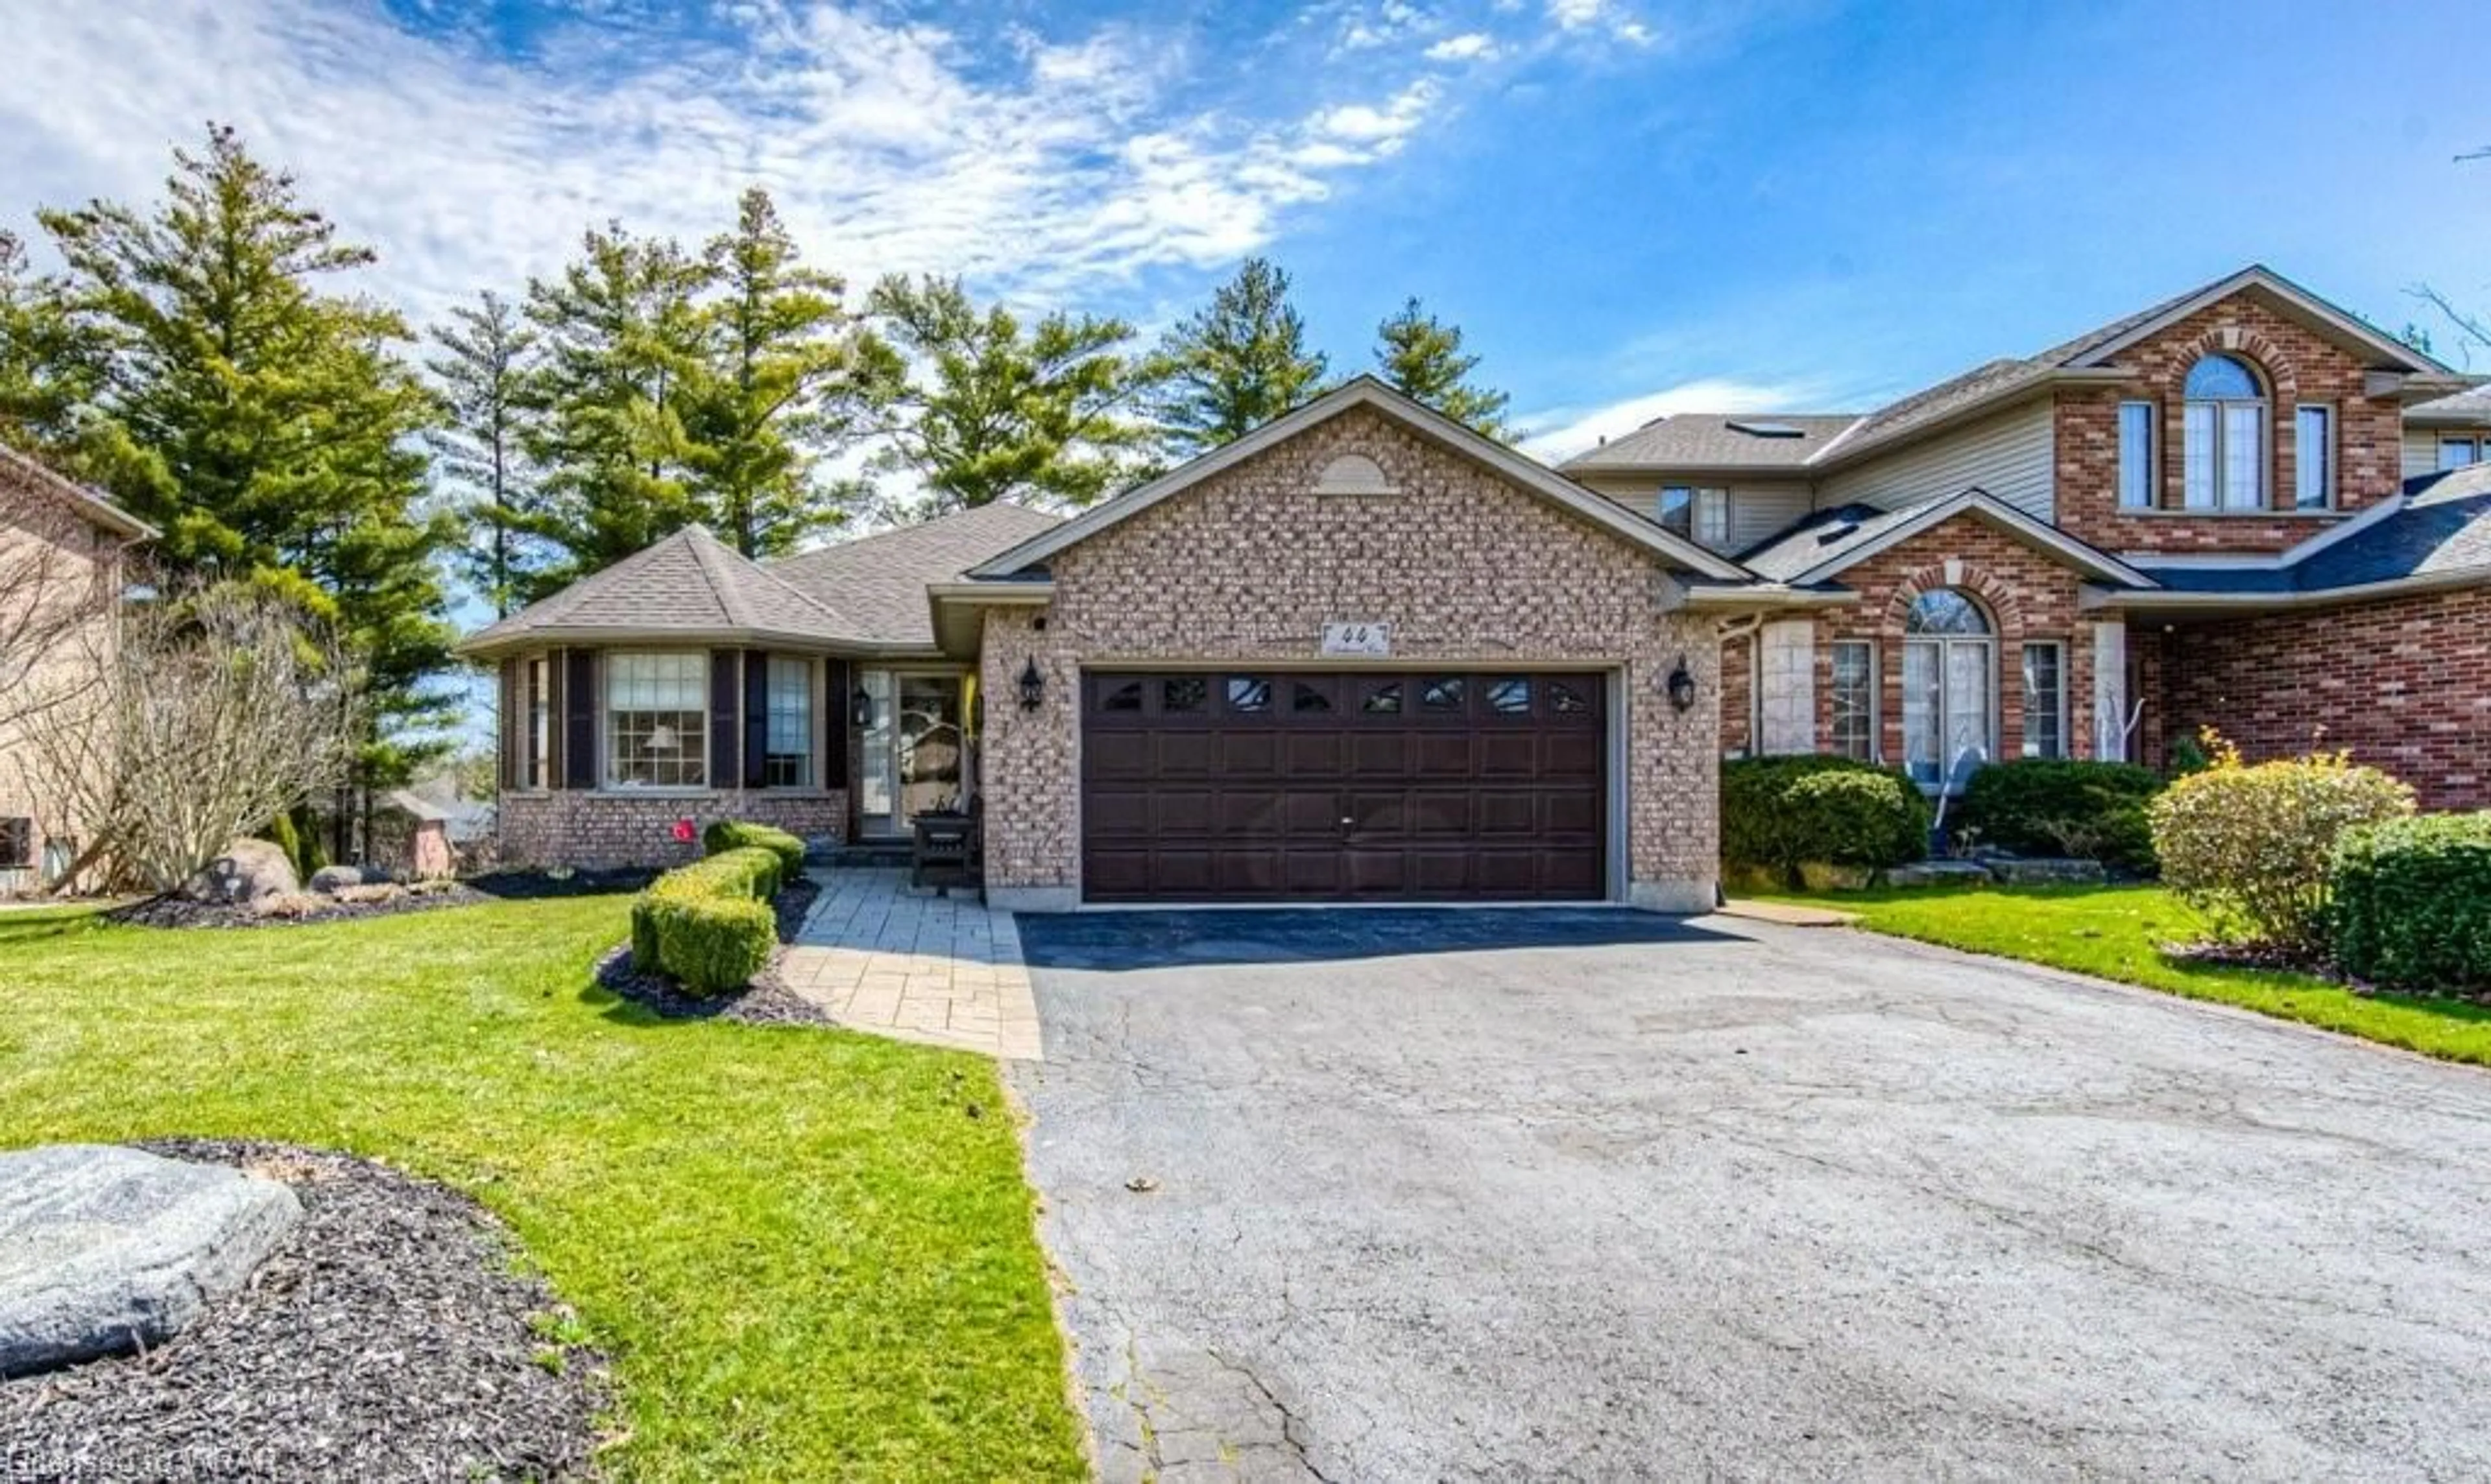 Home with brick exterior material for 44 Archwood Cres, Cambridge Ontario N1T 2A6